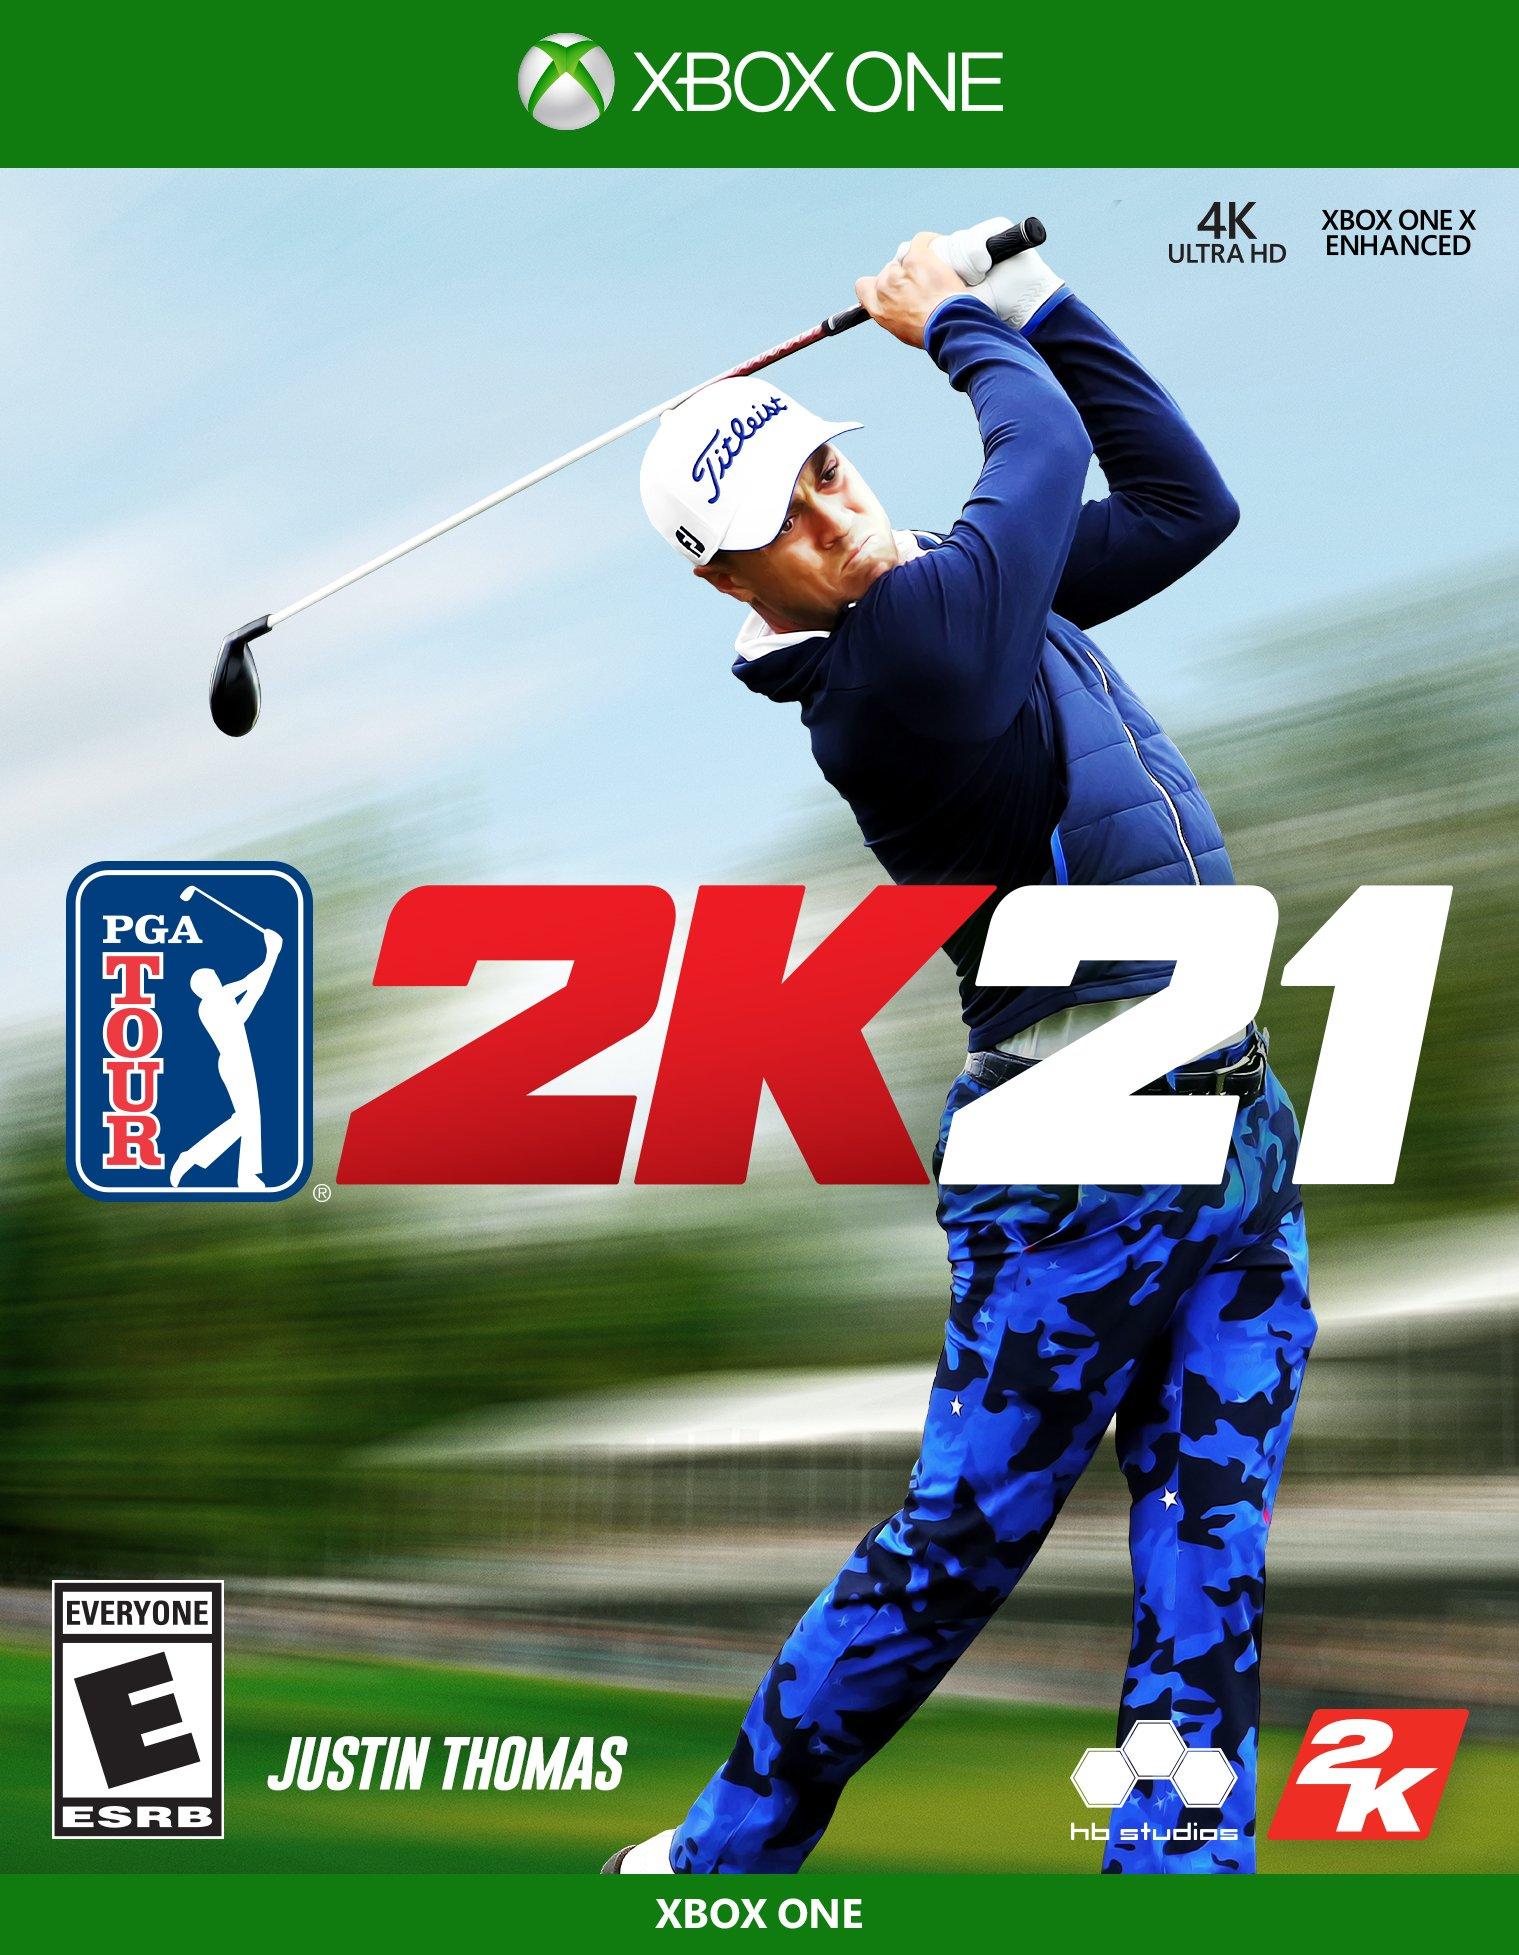 golf video games xbox one